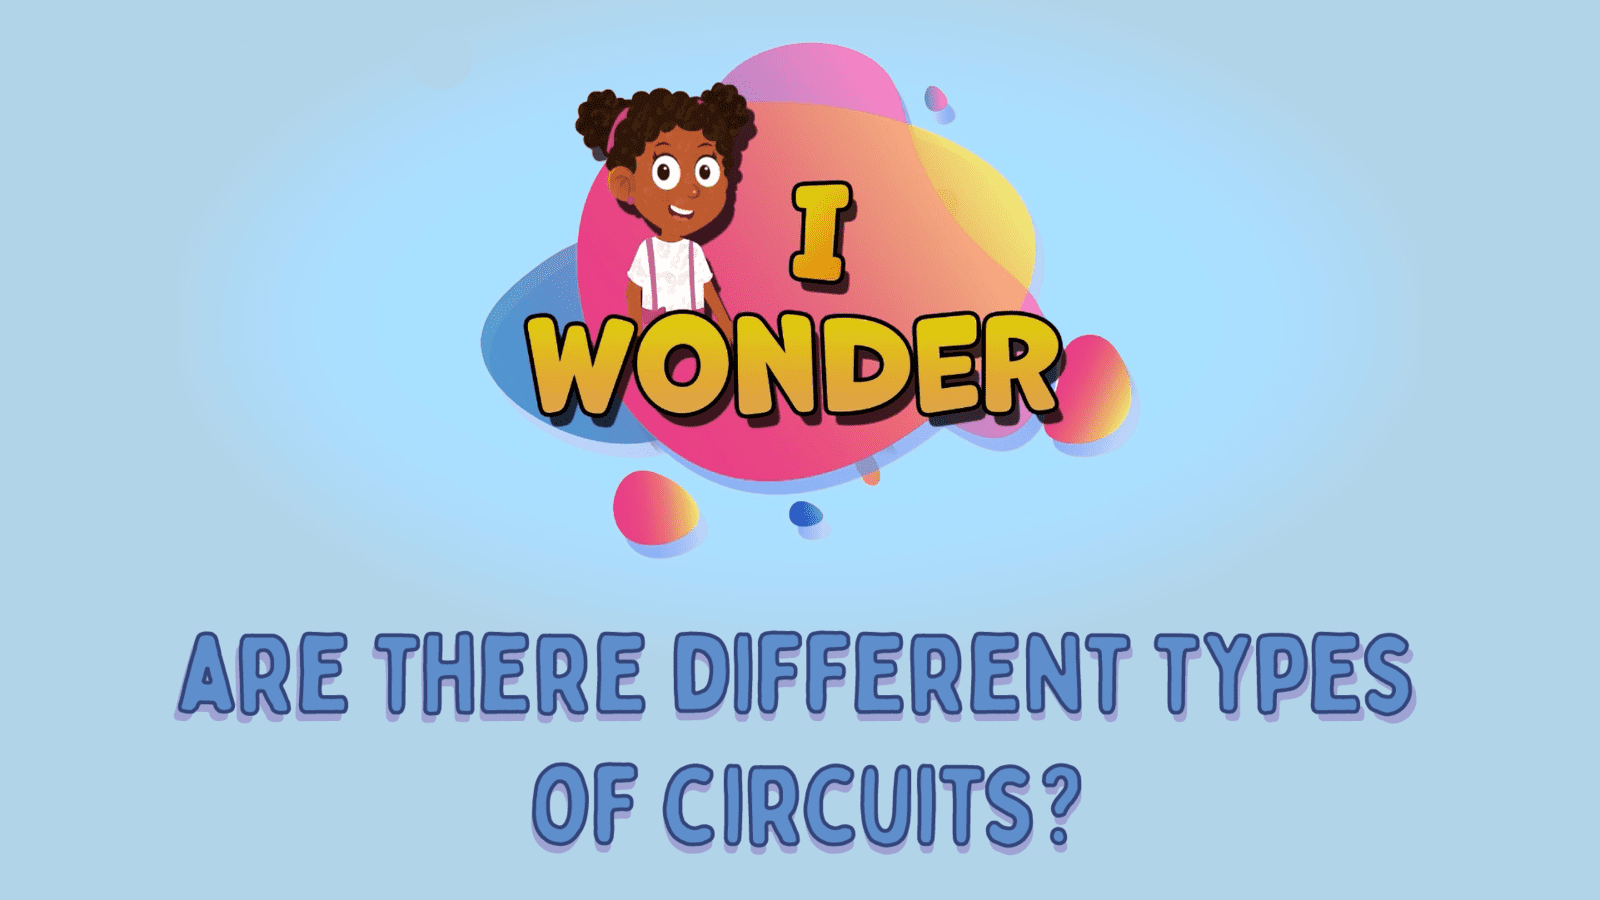 Are There Different Types Of Circuits?